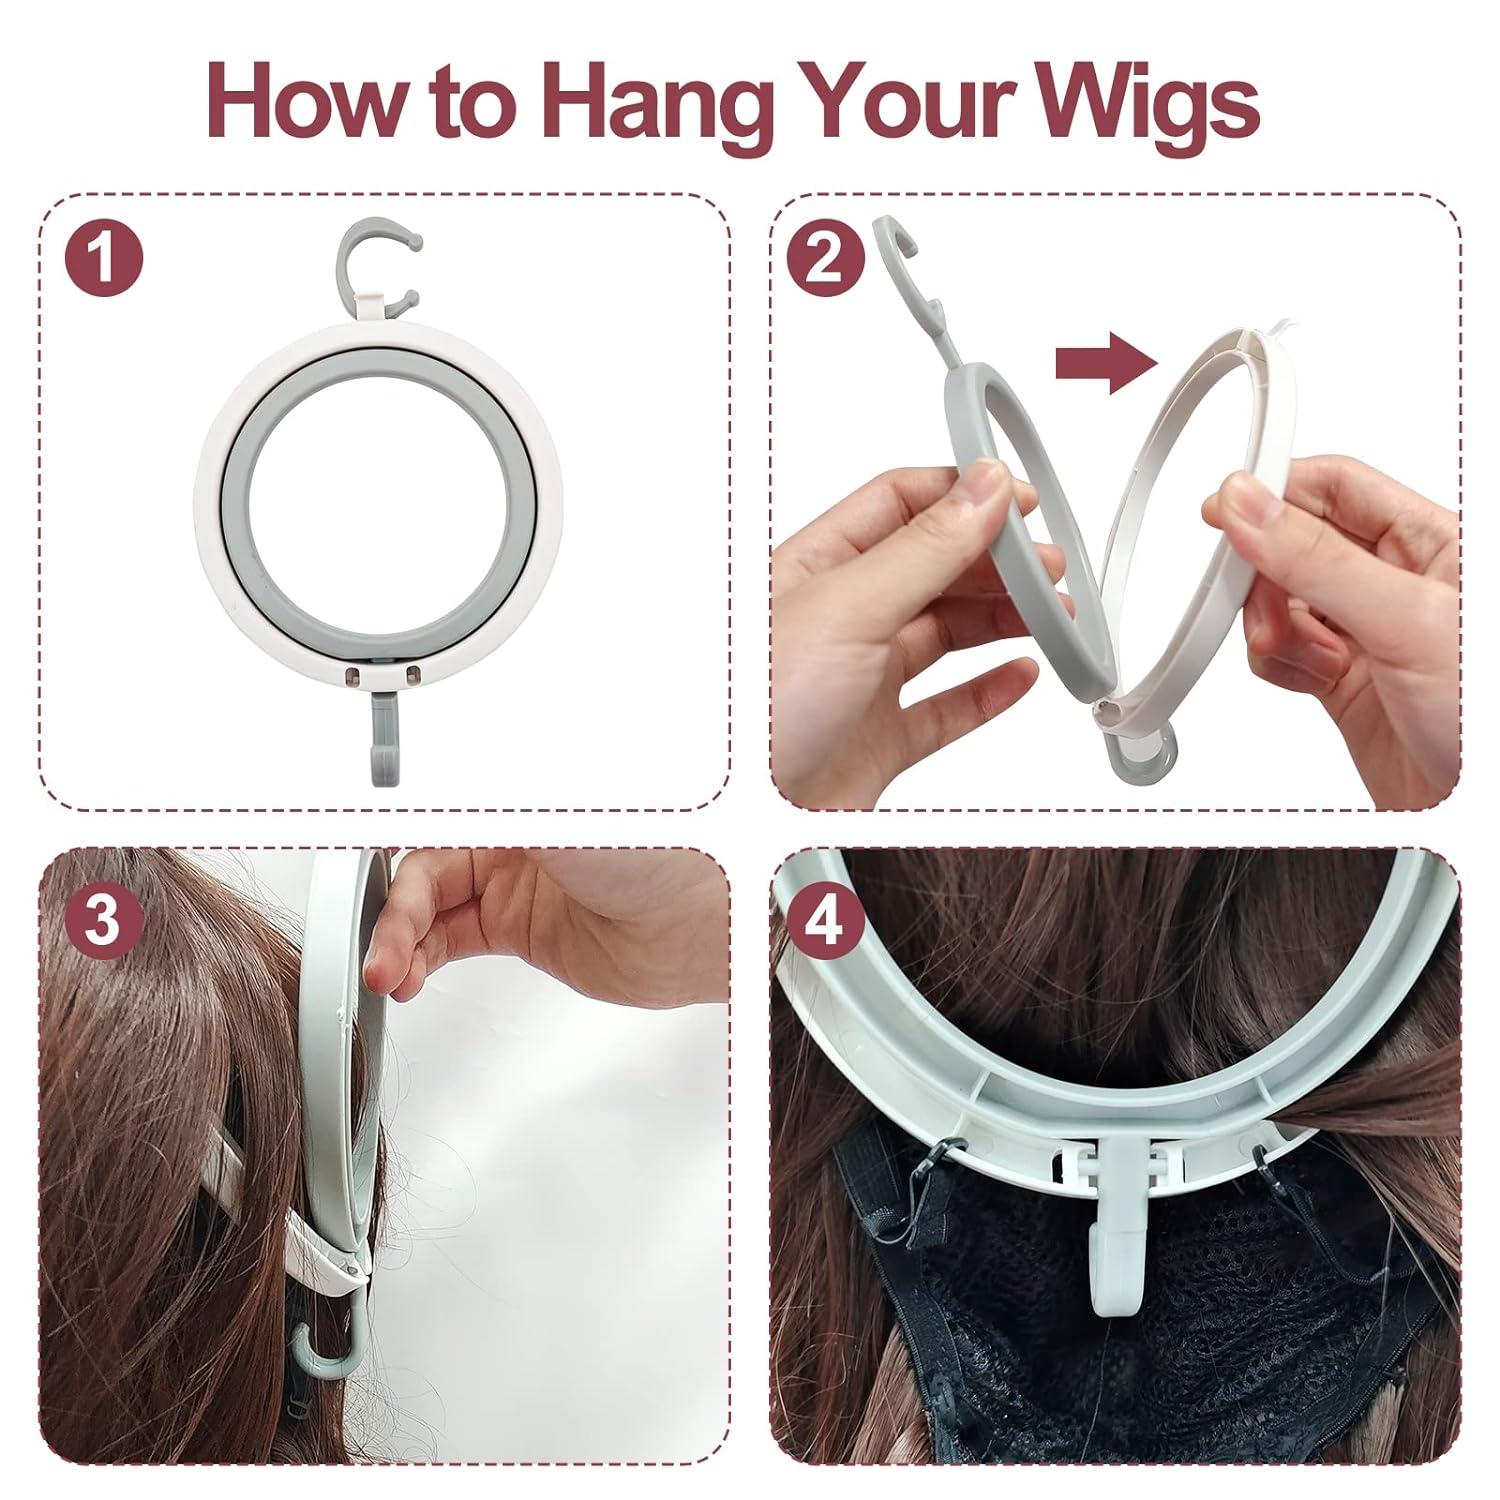 Hanging Wig Stand 4 Pack Portable Wig Hanger for Multiple Wigs for Storage  and Display Collapsible Wig Dryer Holder for All Wigs and Hats Holder (Wig  Stand)